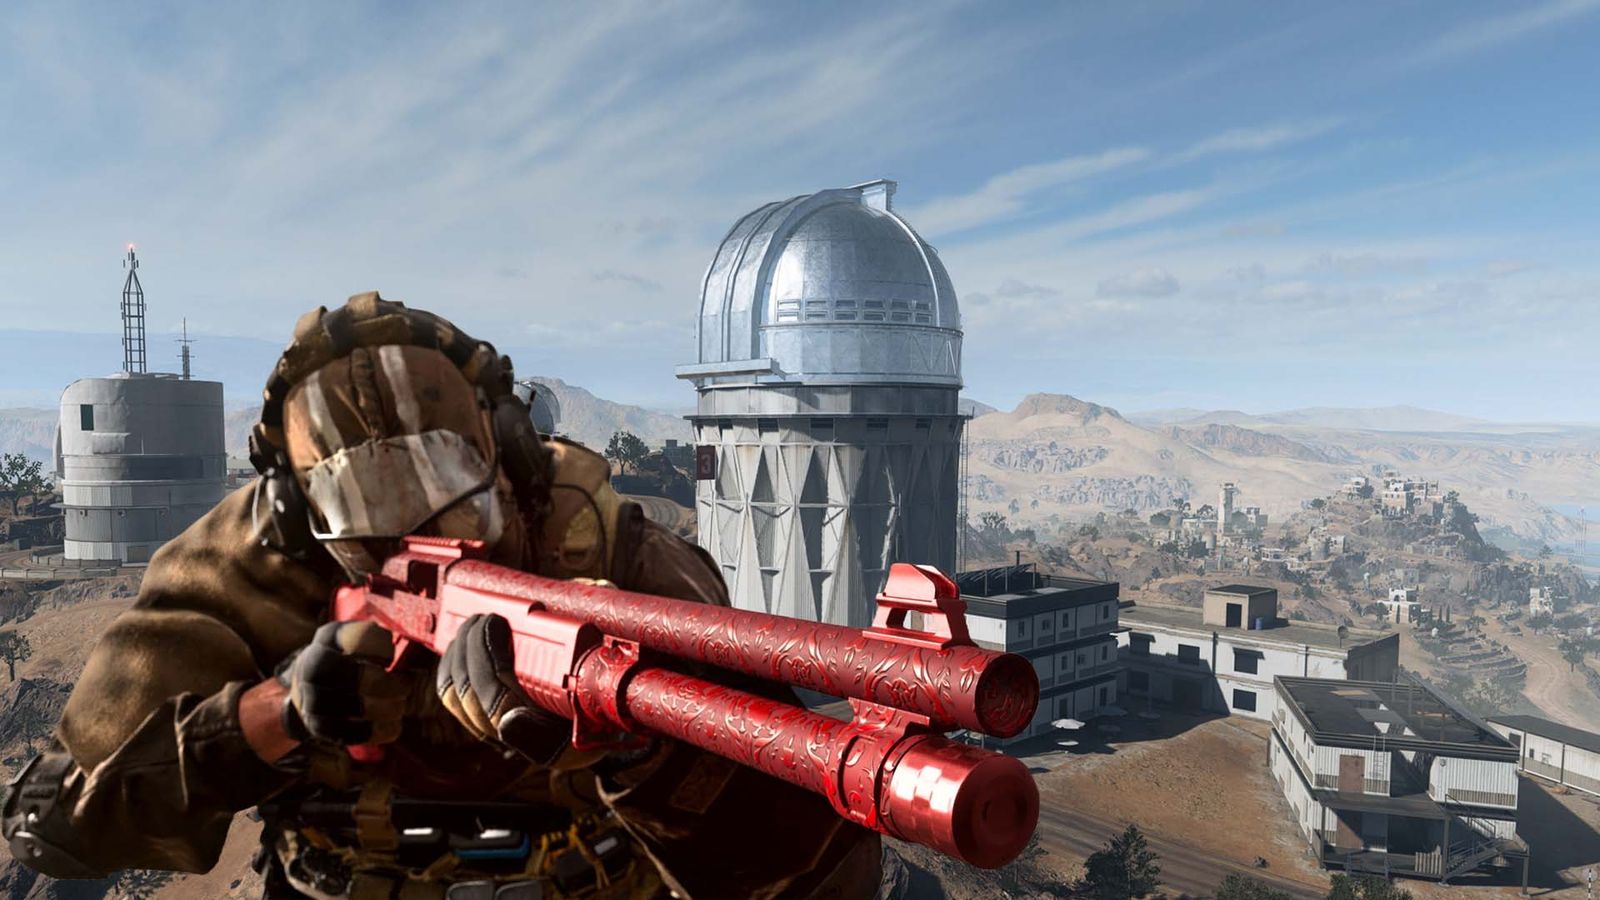 Warzone player aiming down sights of shotgun with Zaya Observatory in background